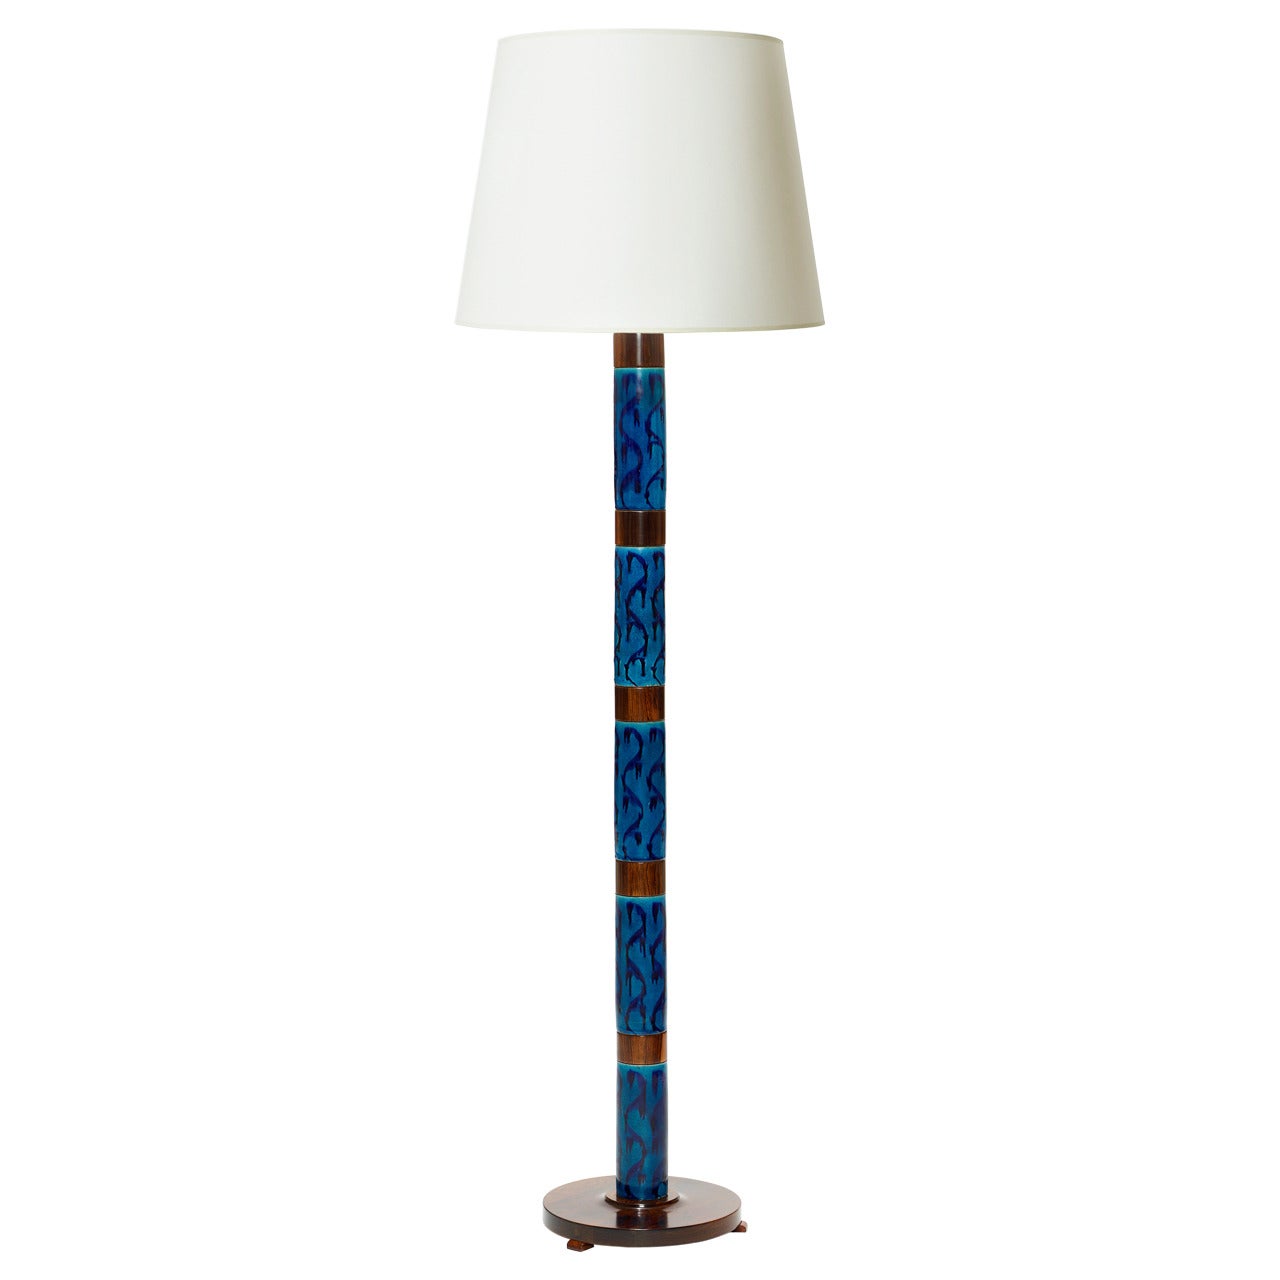 Standing Lamp with Hand-Painted Tiles by Stig Lindberg for Gustavsberg For Sale